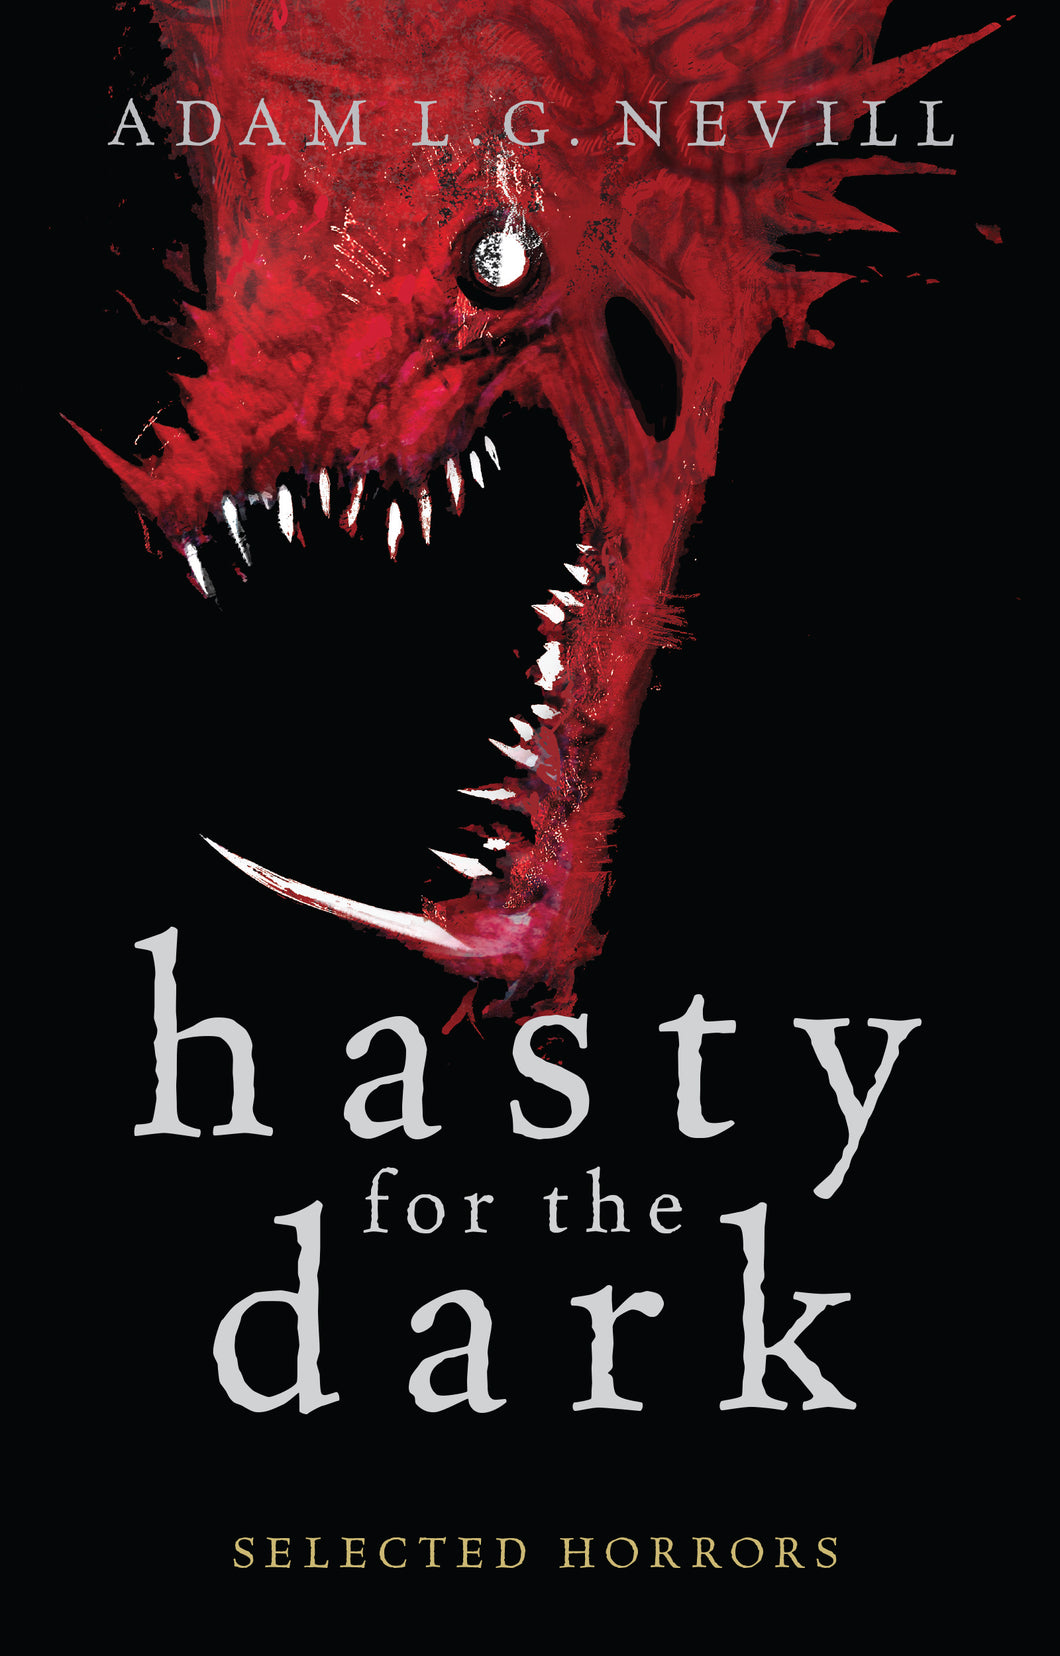 Hasty for the Dark: Selected Horrors - signed paperback book